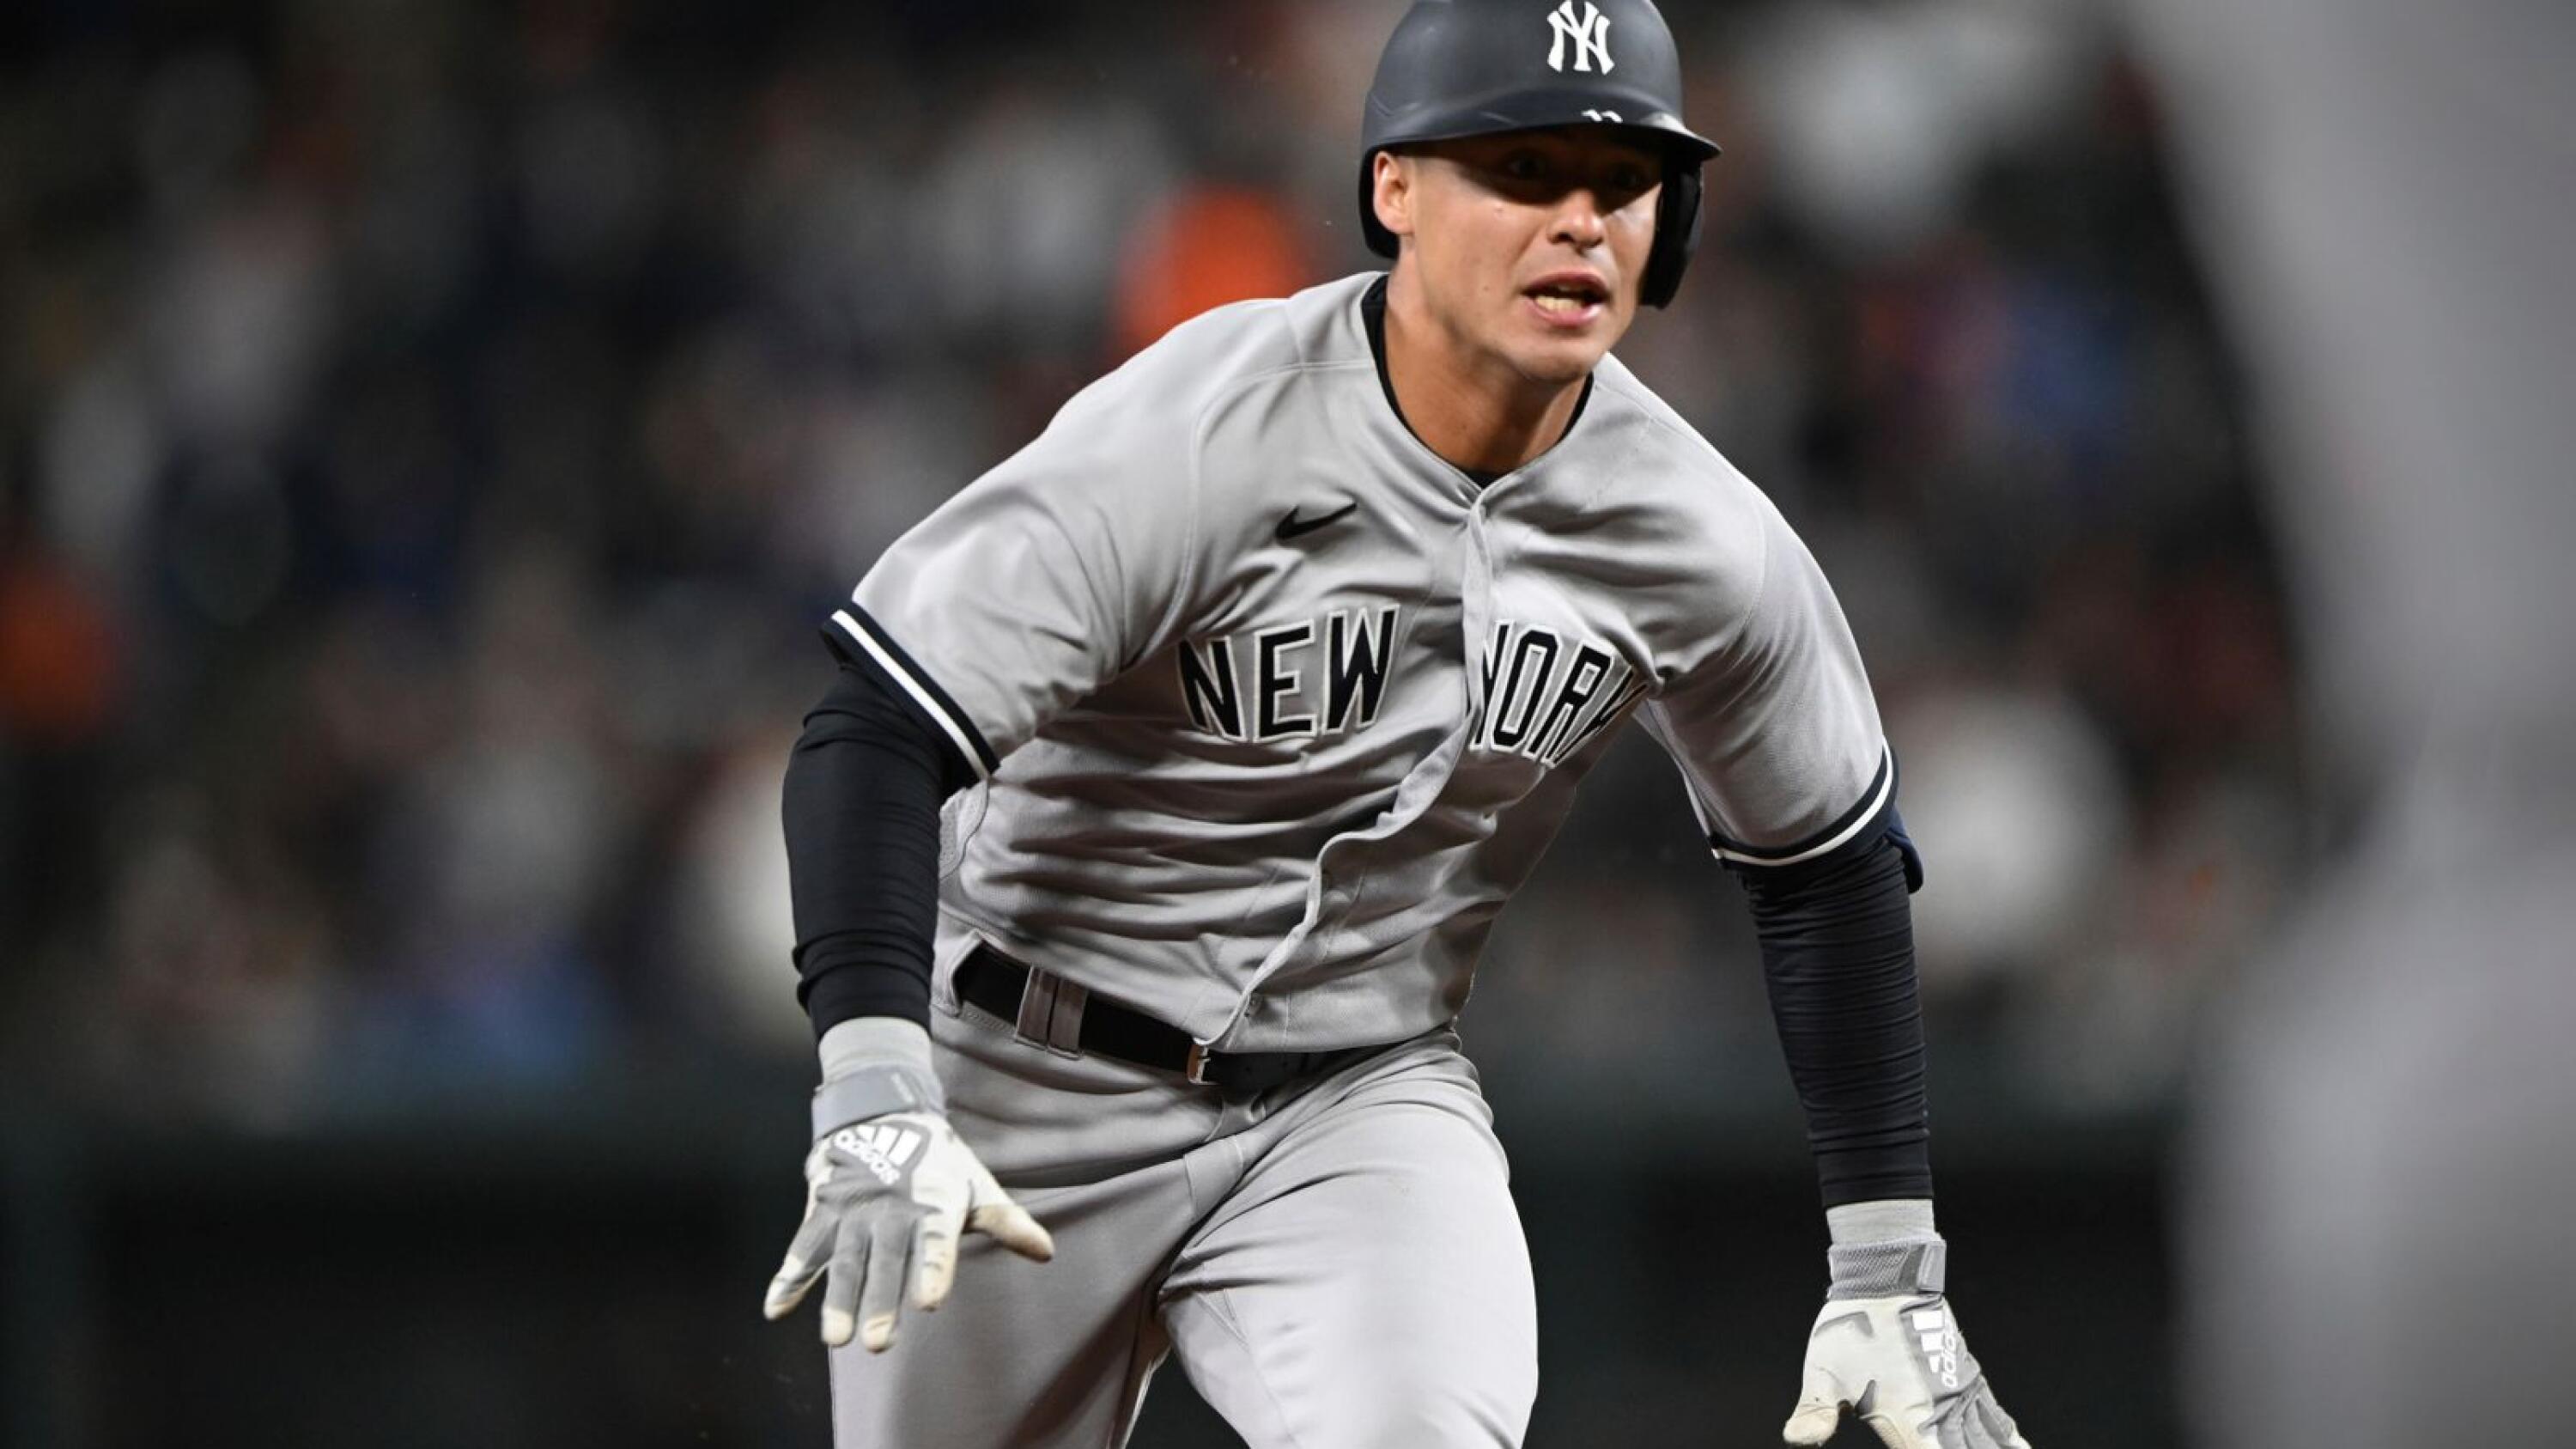 Giancarlo Stanton looks primed for a big year for the Yankees